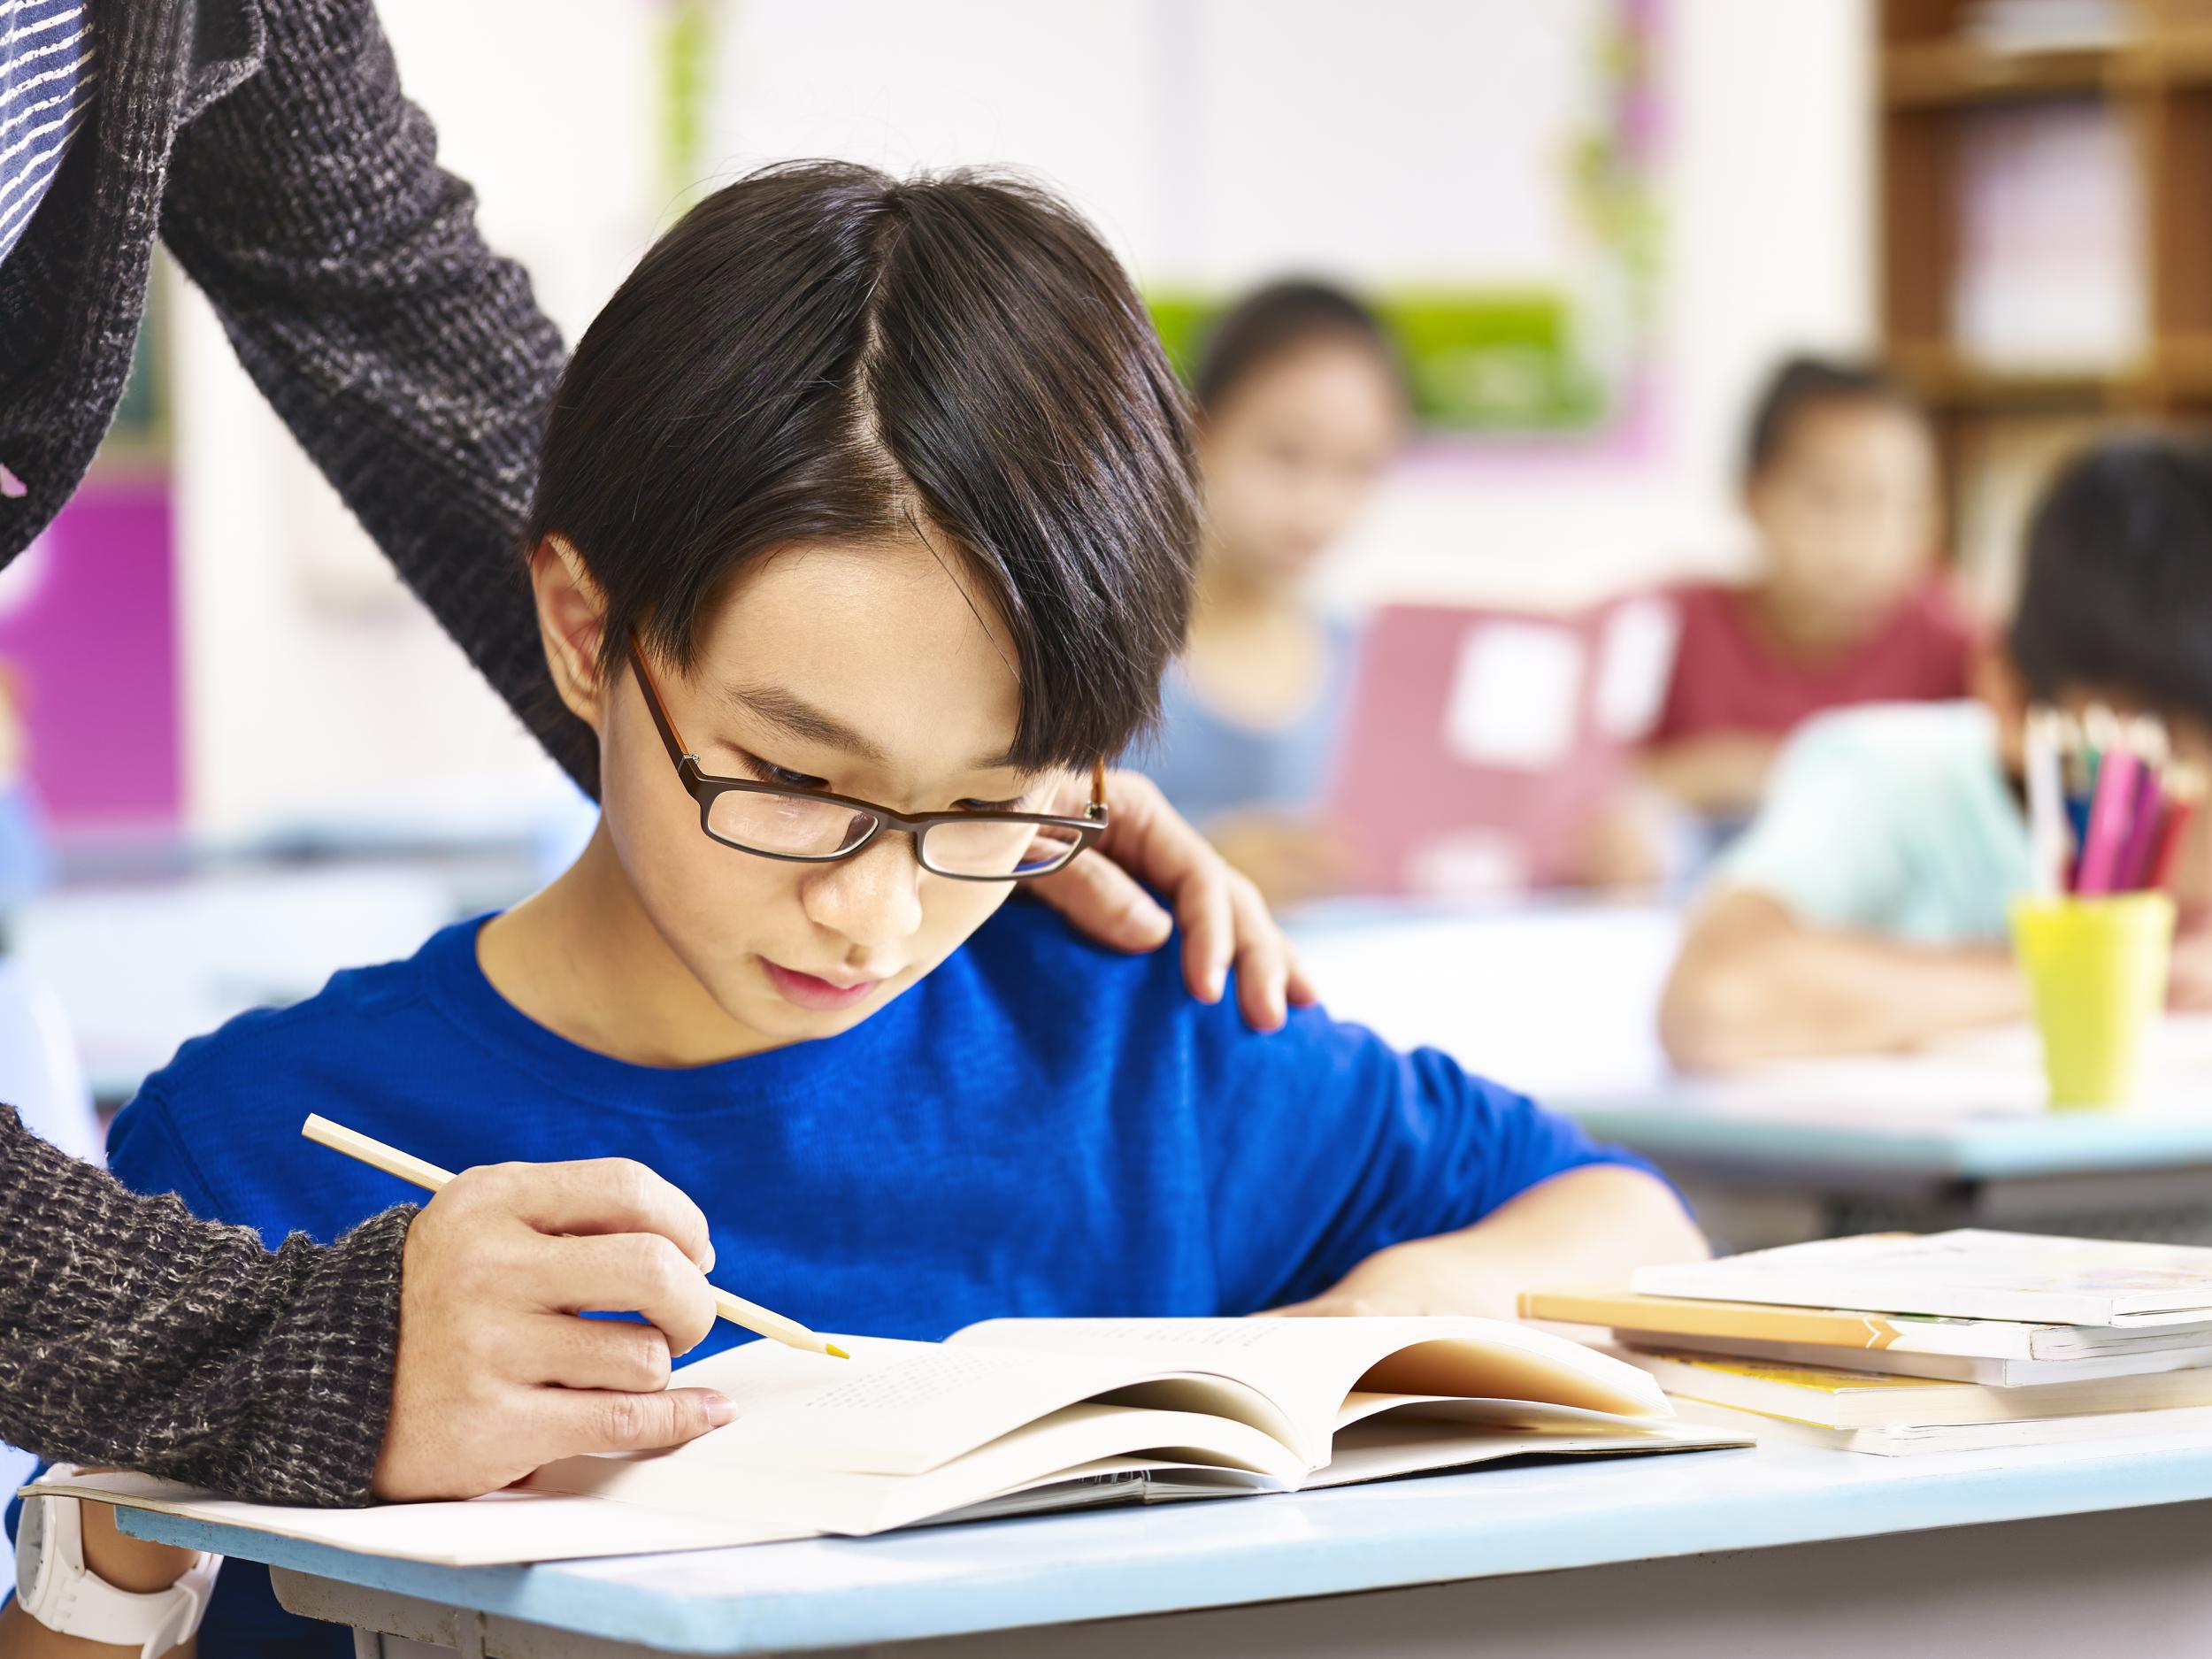 Levels of shortsightedness among Chinese pupils rose rapidly between the ages of seven and 13, study found.